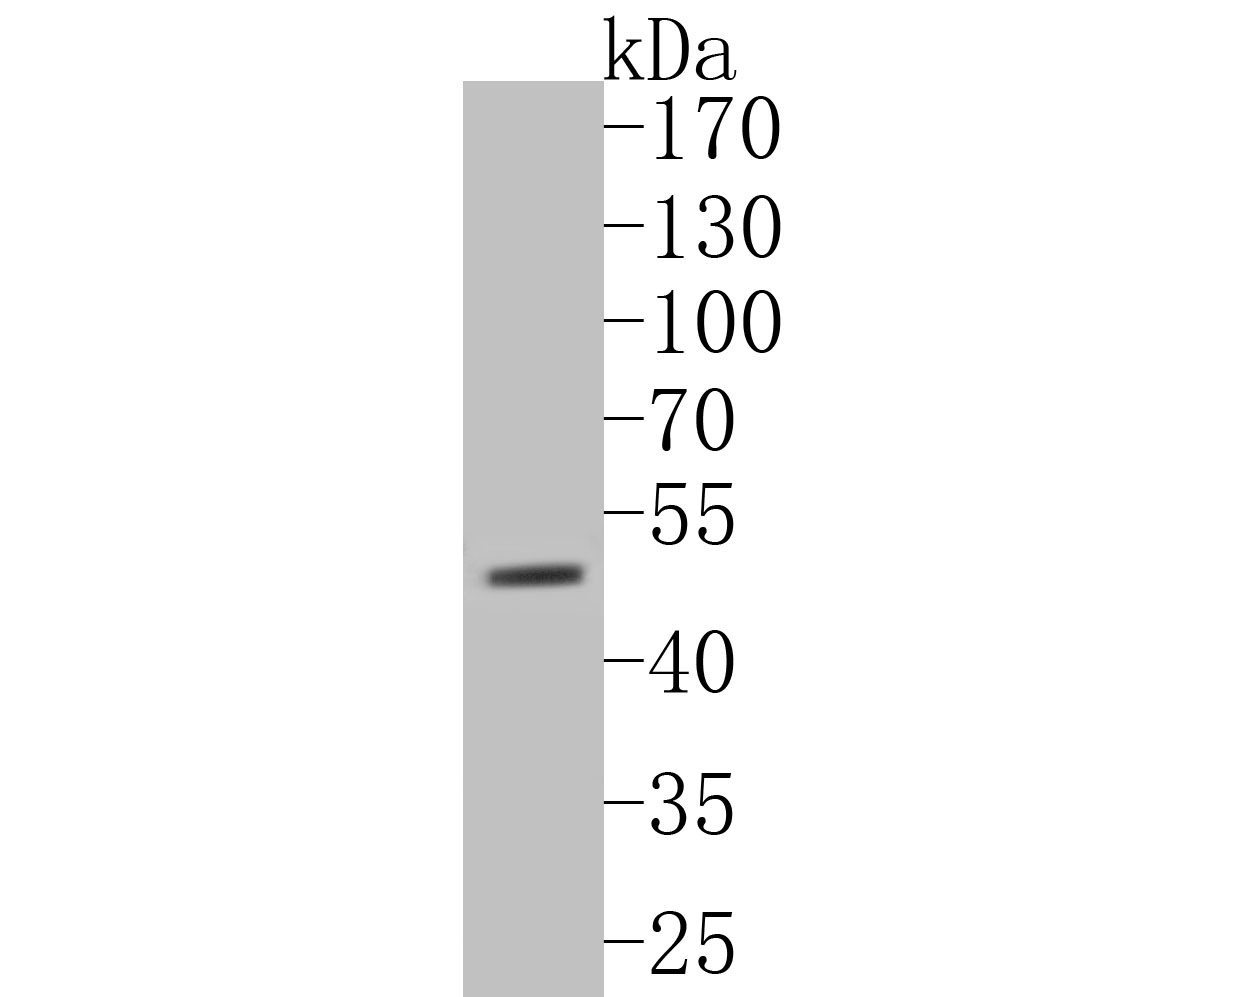 Western blot analysis of P2X3 on mouse testis tissue lysates. Proteins were transferred to a PVDF membrane and blocked with 5% BSA in PBS for 1 hour at room temperature. The primary antibody (ER1902-88, 1/500) was used in 5% BSA at room temperature for 2 hours. Goat Anti-Rabbit IgG - HRP Secondary Antibody (HA1001) at 1:5,000 dilution was used for 1 hour at room temperature.